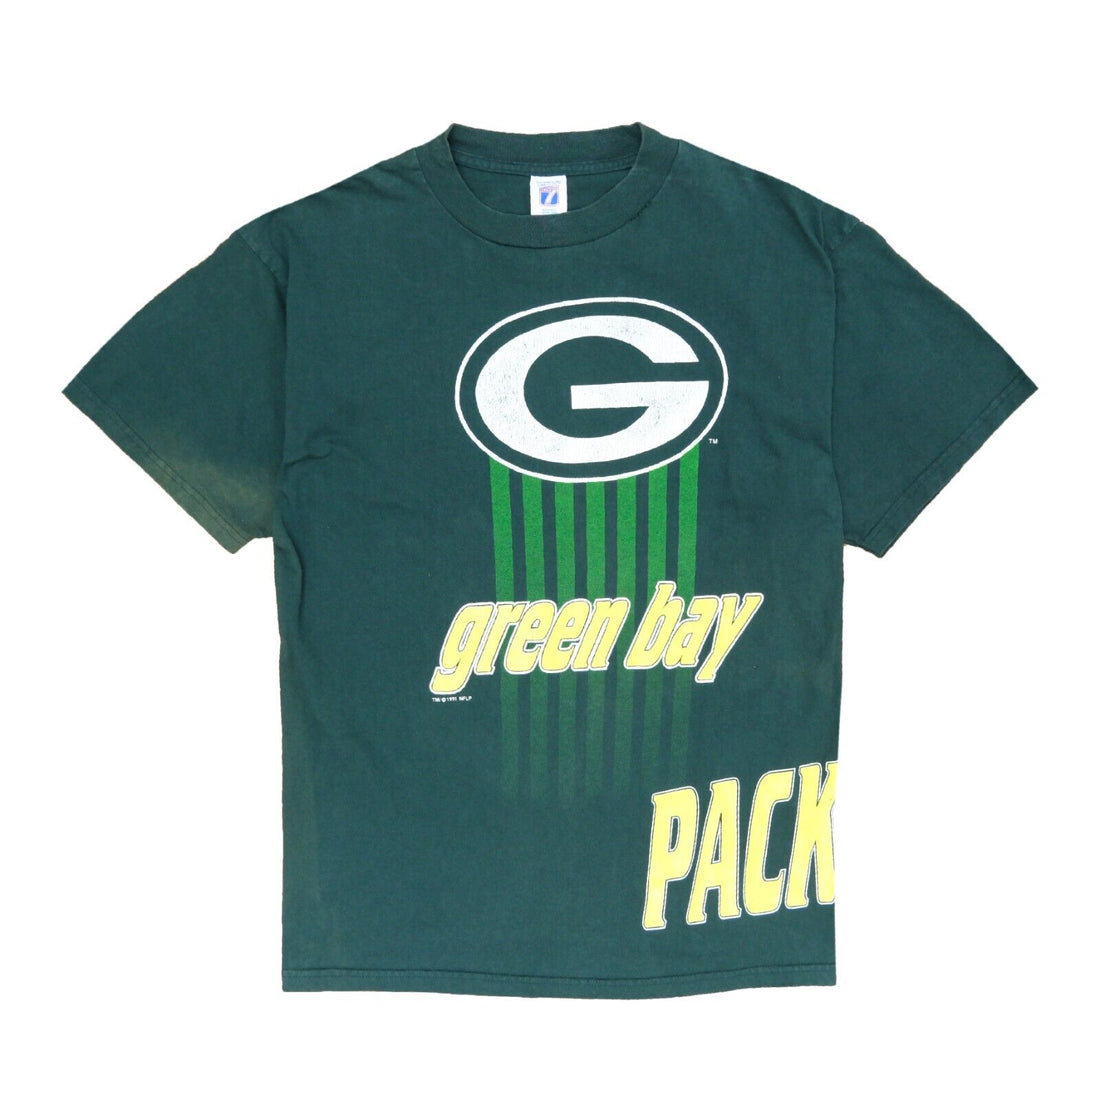 Vintage Green Bay Packers Logo 7 T-Shirt Size XL Made USA 1995 90s NFL